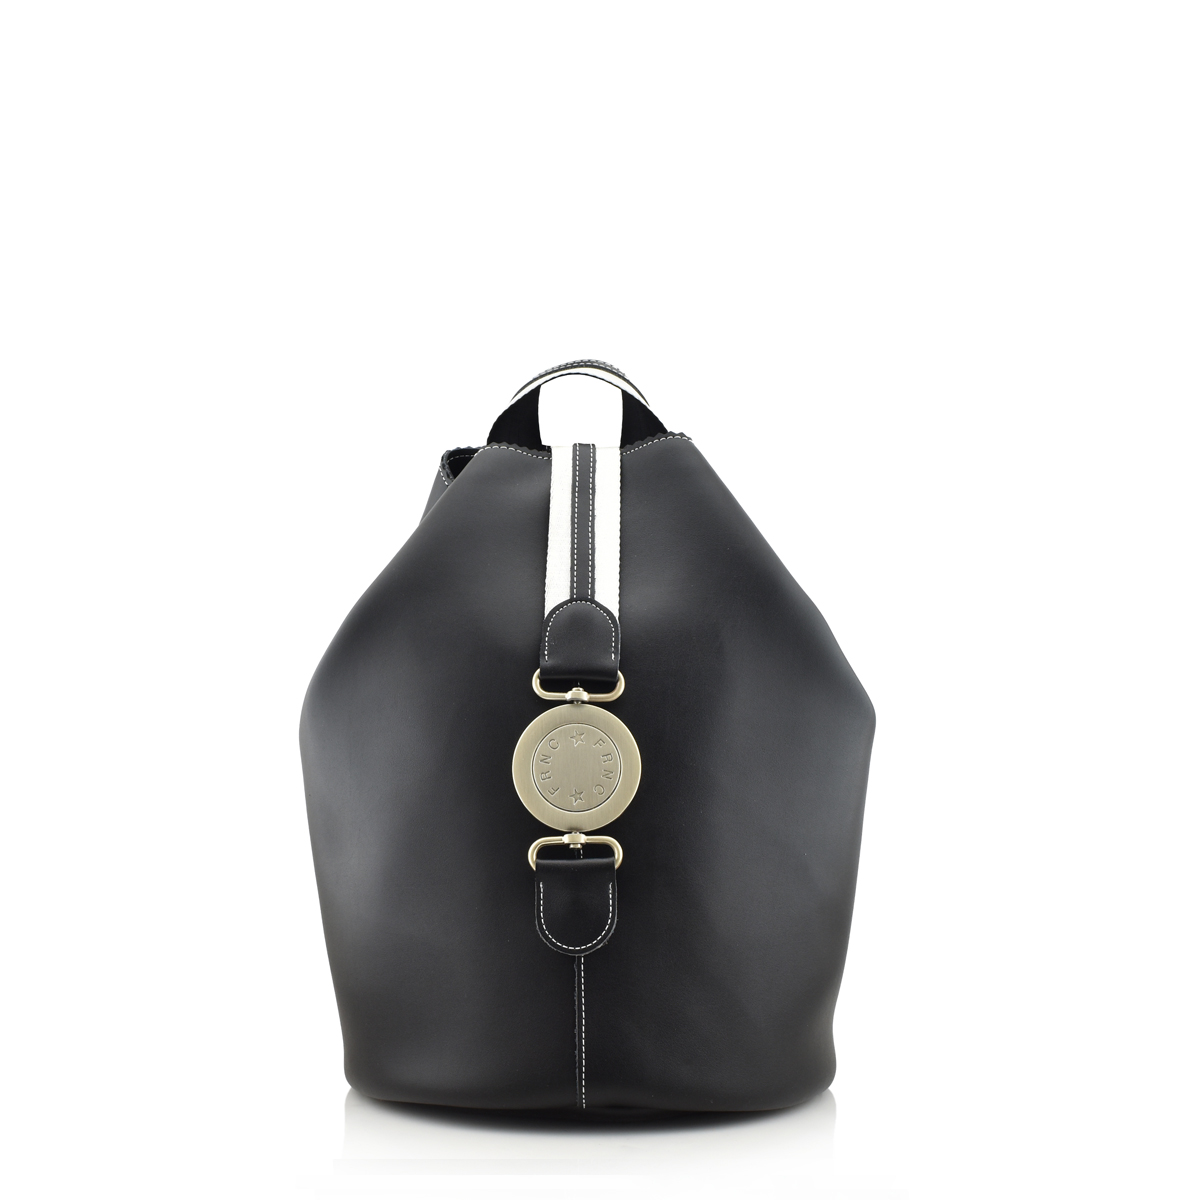 FRNC - FRANCESCO SMALL CLASSIC POUCH BACKPACK - 562 BLK